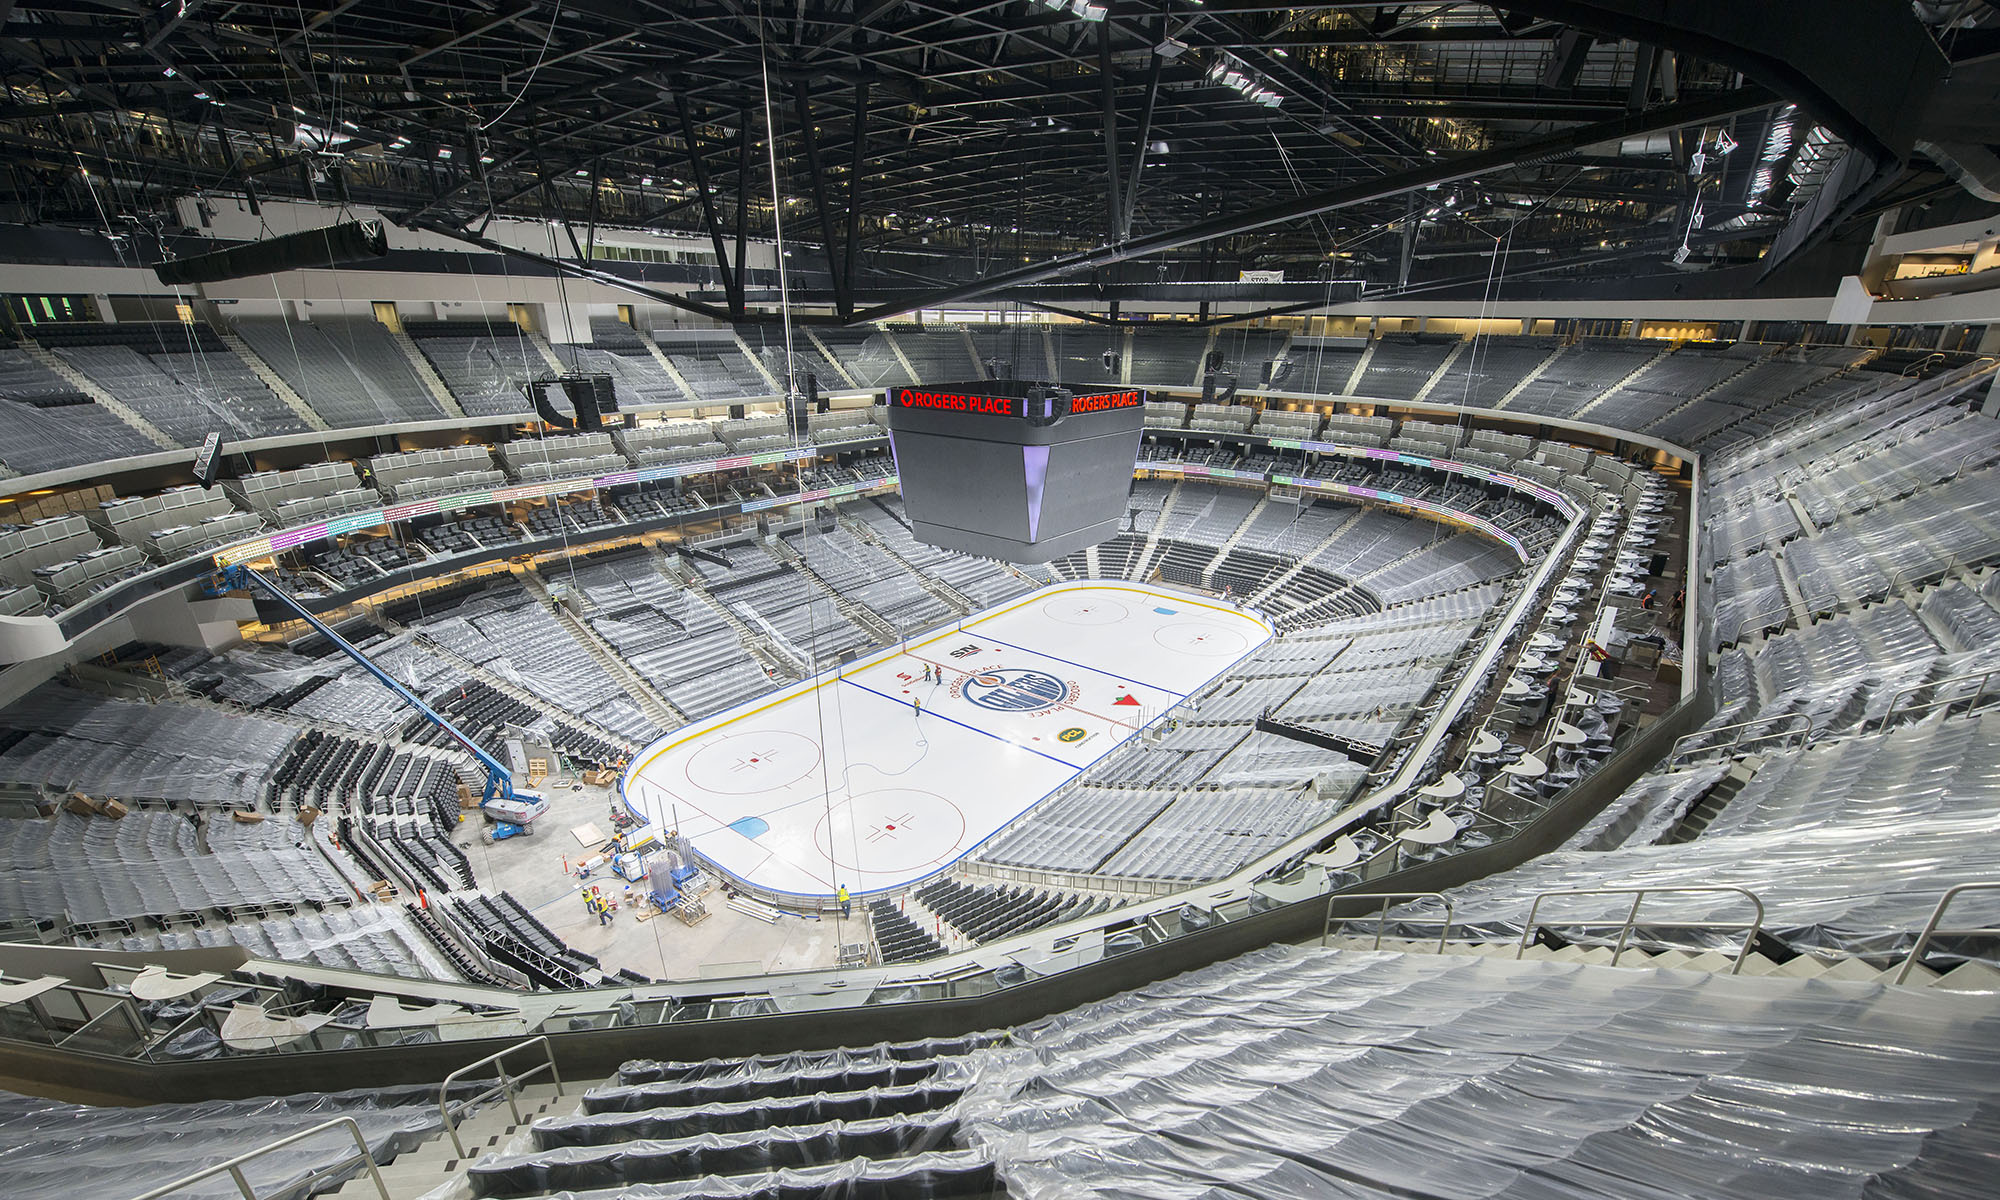 Construction work continues on the interior of the new Prudential Center  under construction in Newark, N.J., Wednesday, May 30, 2007. The $377  million arena will be the home of the NHL New